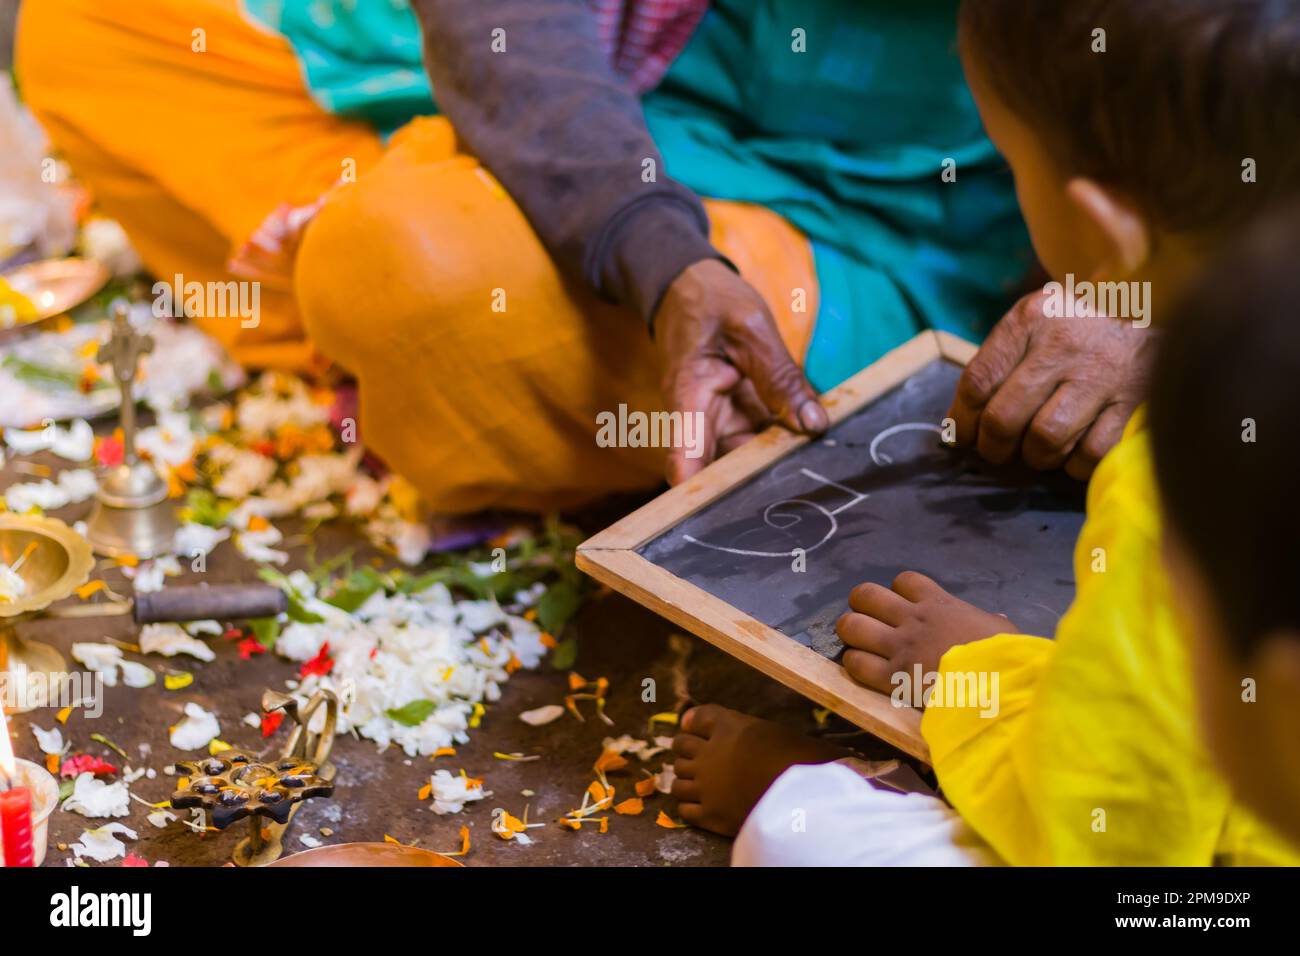 Aksharabhyasam or hate khori ritual is being performed to introduce education to young children during Saraswati Puja or vasant panchami. The priest i Stock Photo